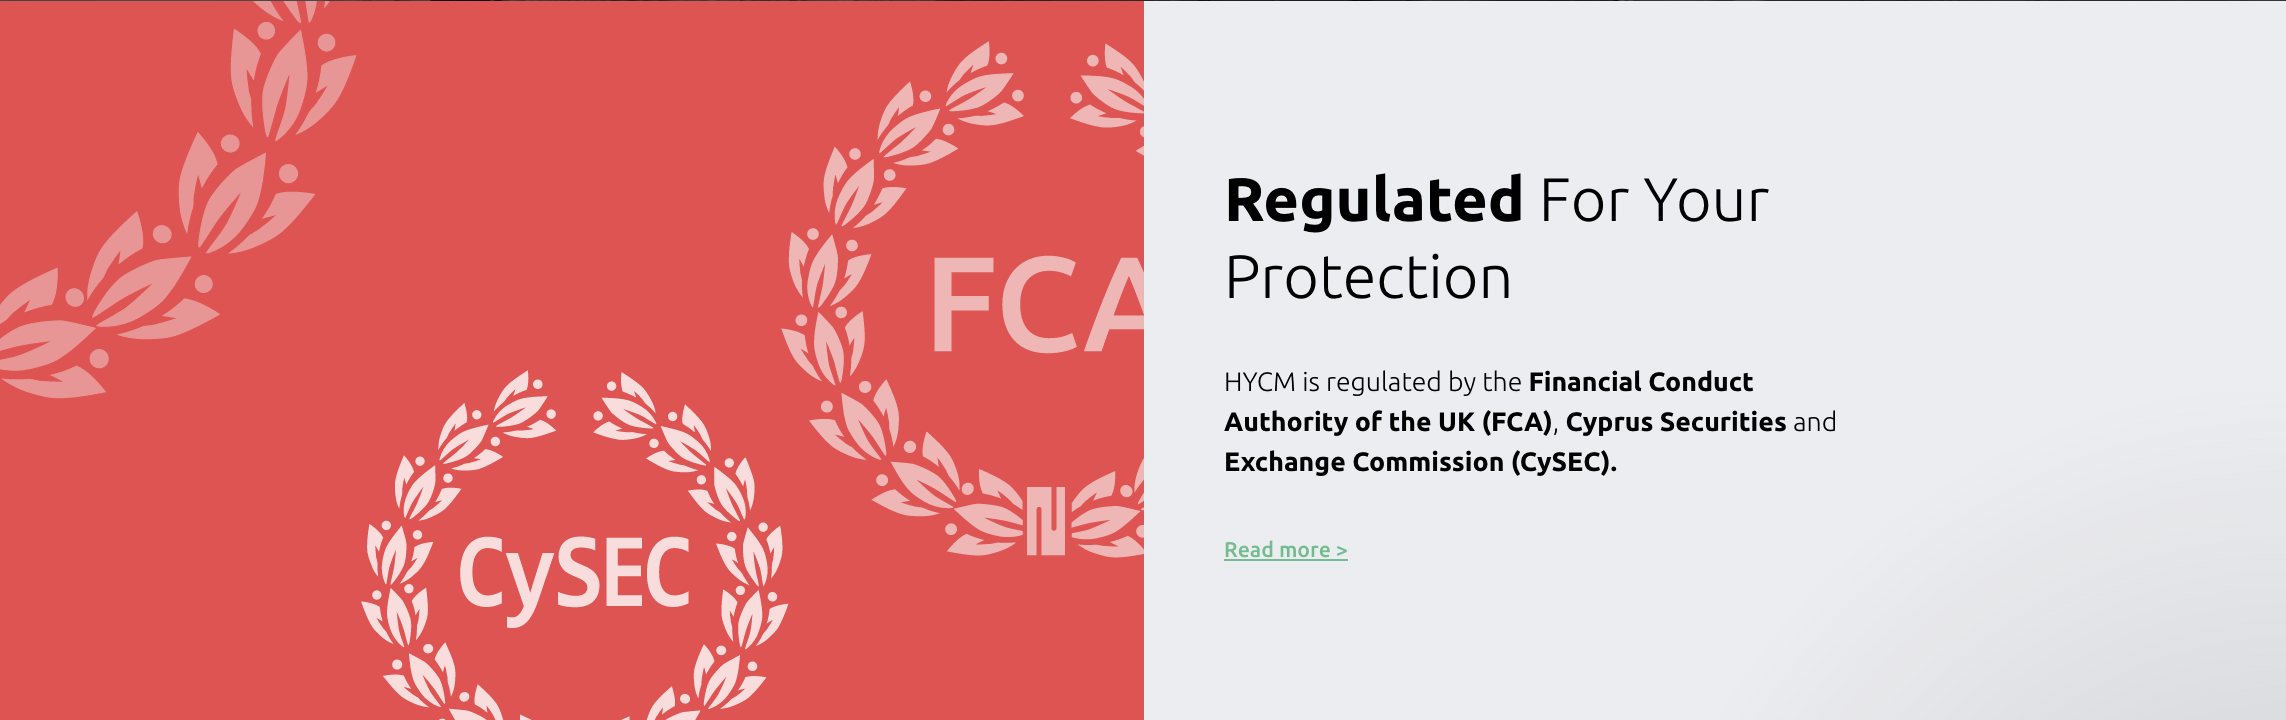 HYCM not only offers Islamic accounts, but is also regulated. Even skeptical investors are likely to be convinced.